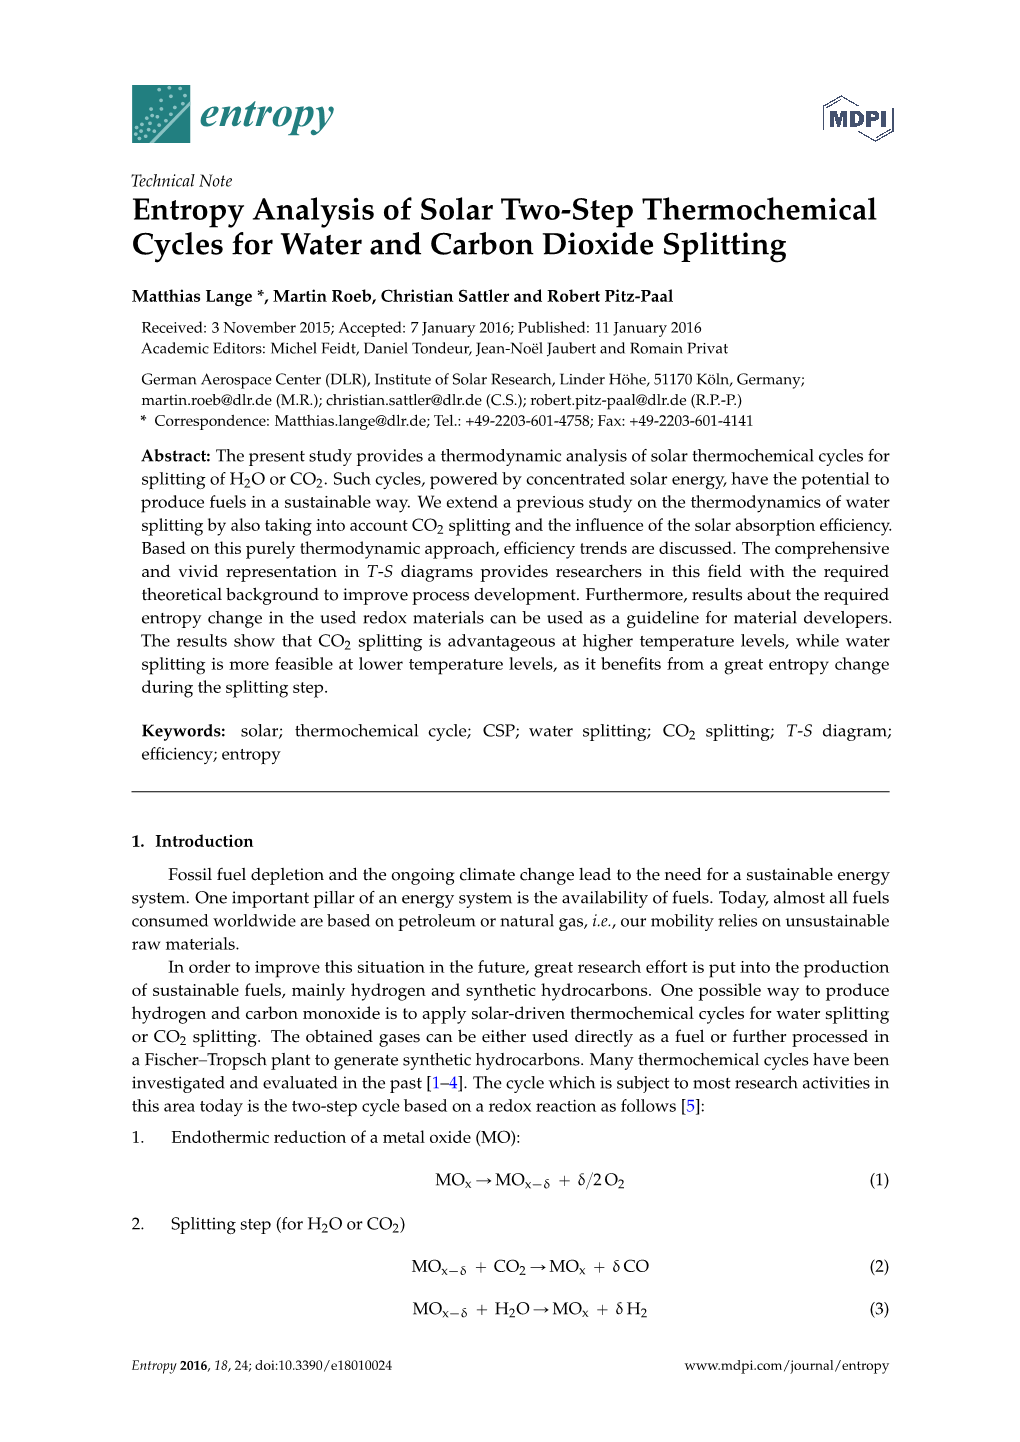 Entropy Analysis of Solar Two-Step Thermochemical Cycles for Water and Carbon Dioxide Splitting